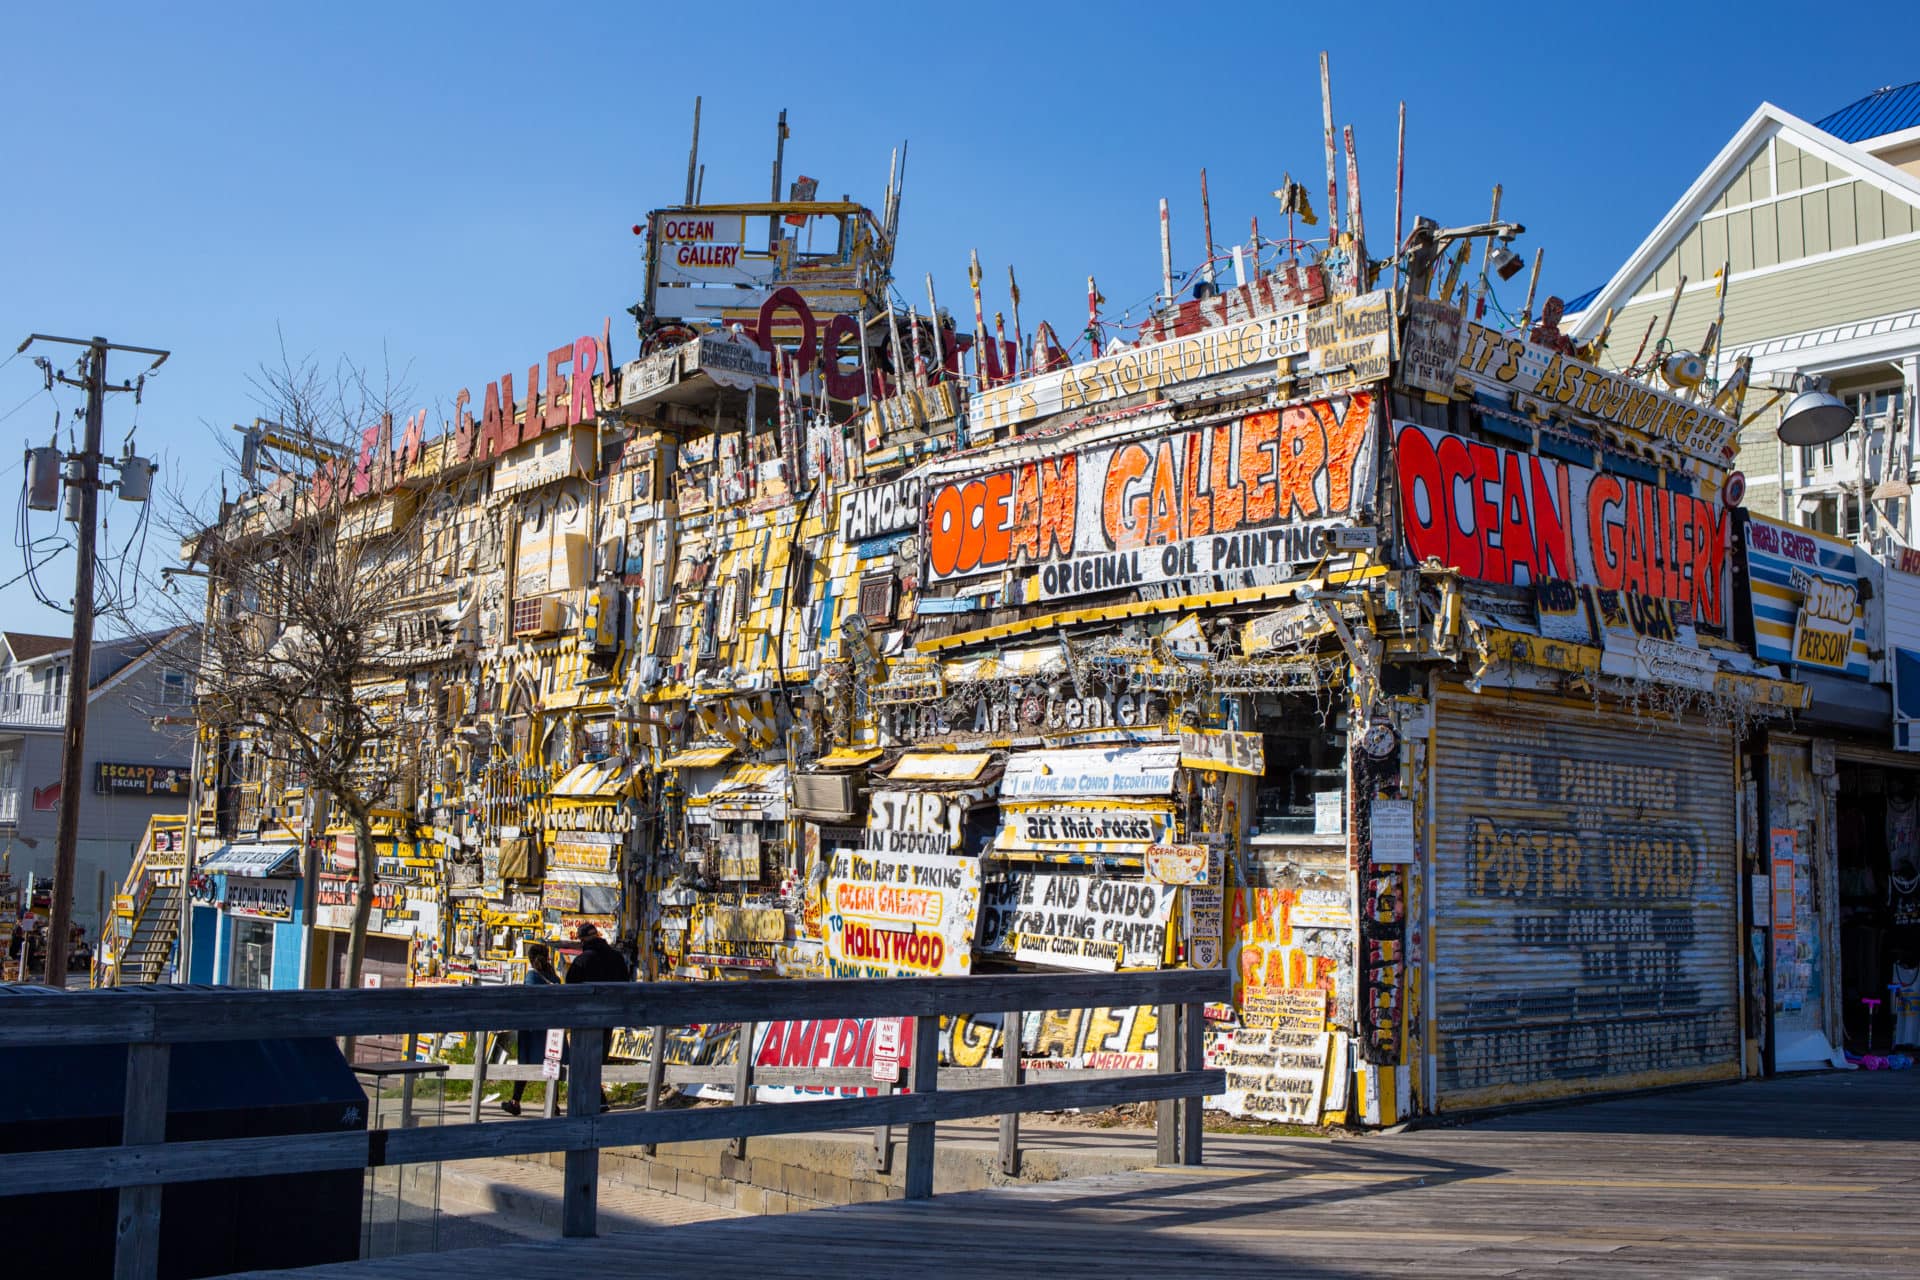 A chaotic boardwalk storefront completely covered in found objects and hand-painted signs